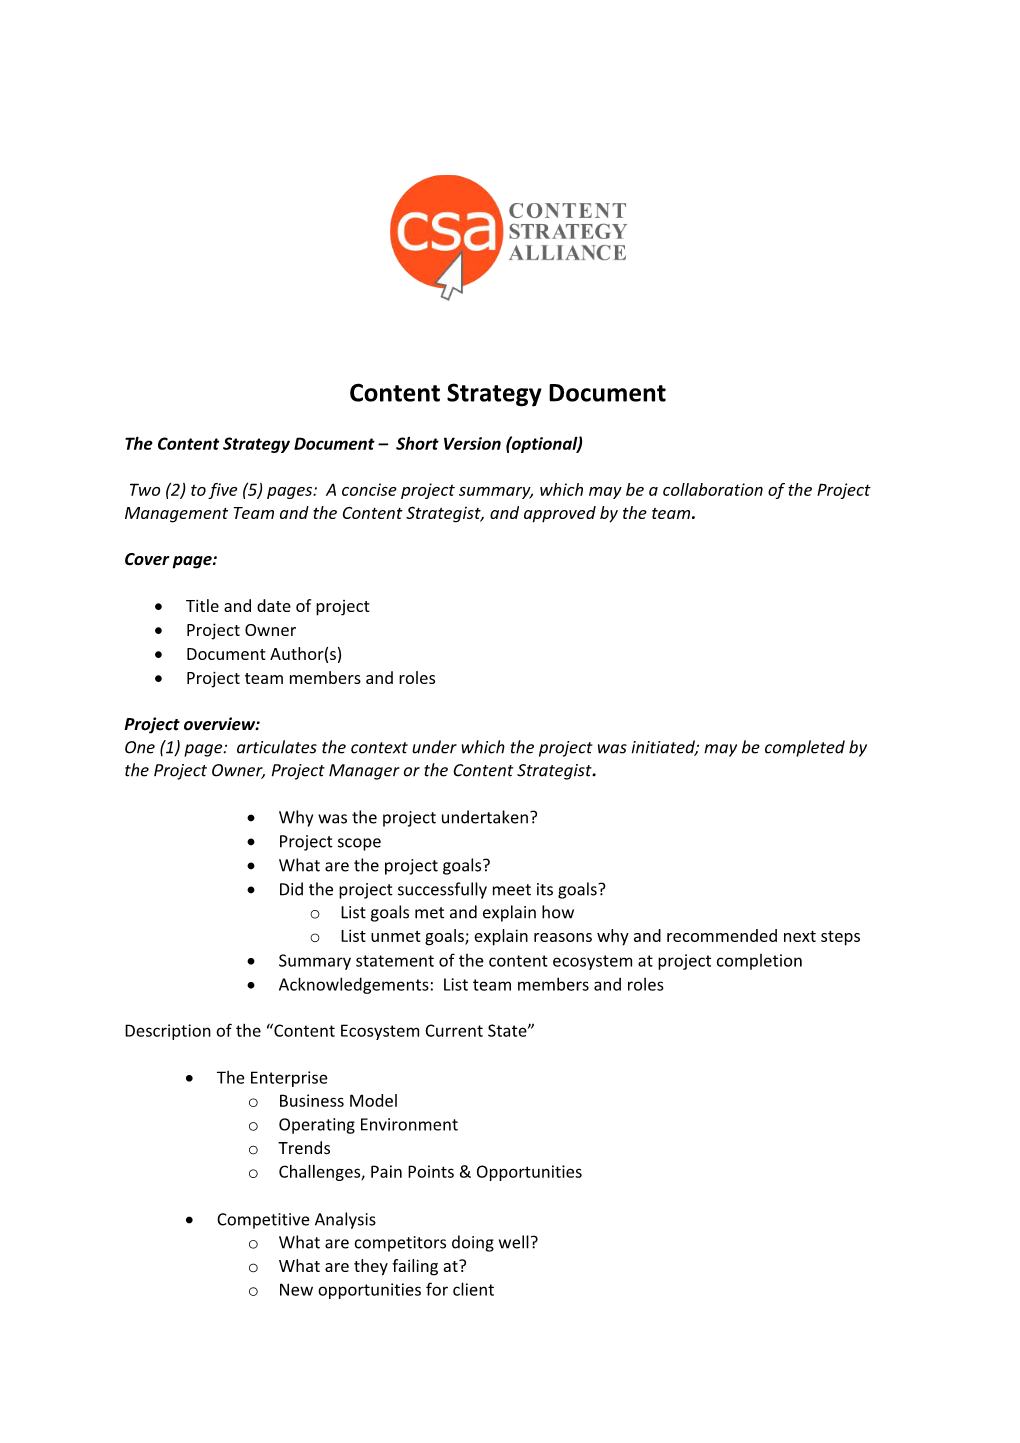 The Content Strategy Document Short Version (Optional)